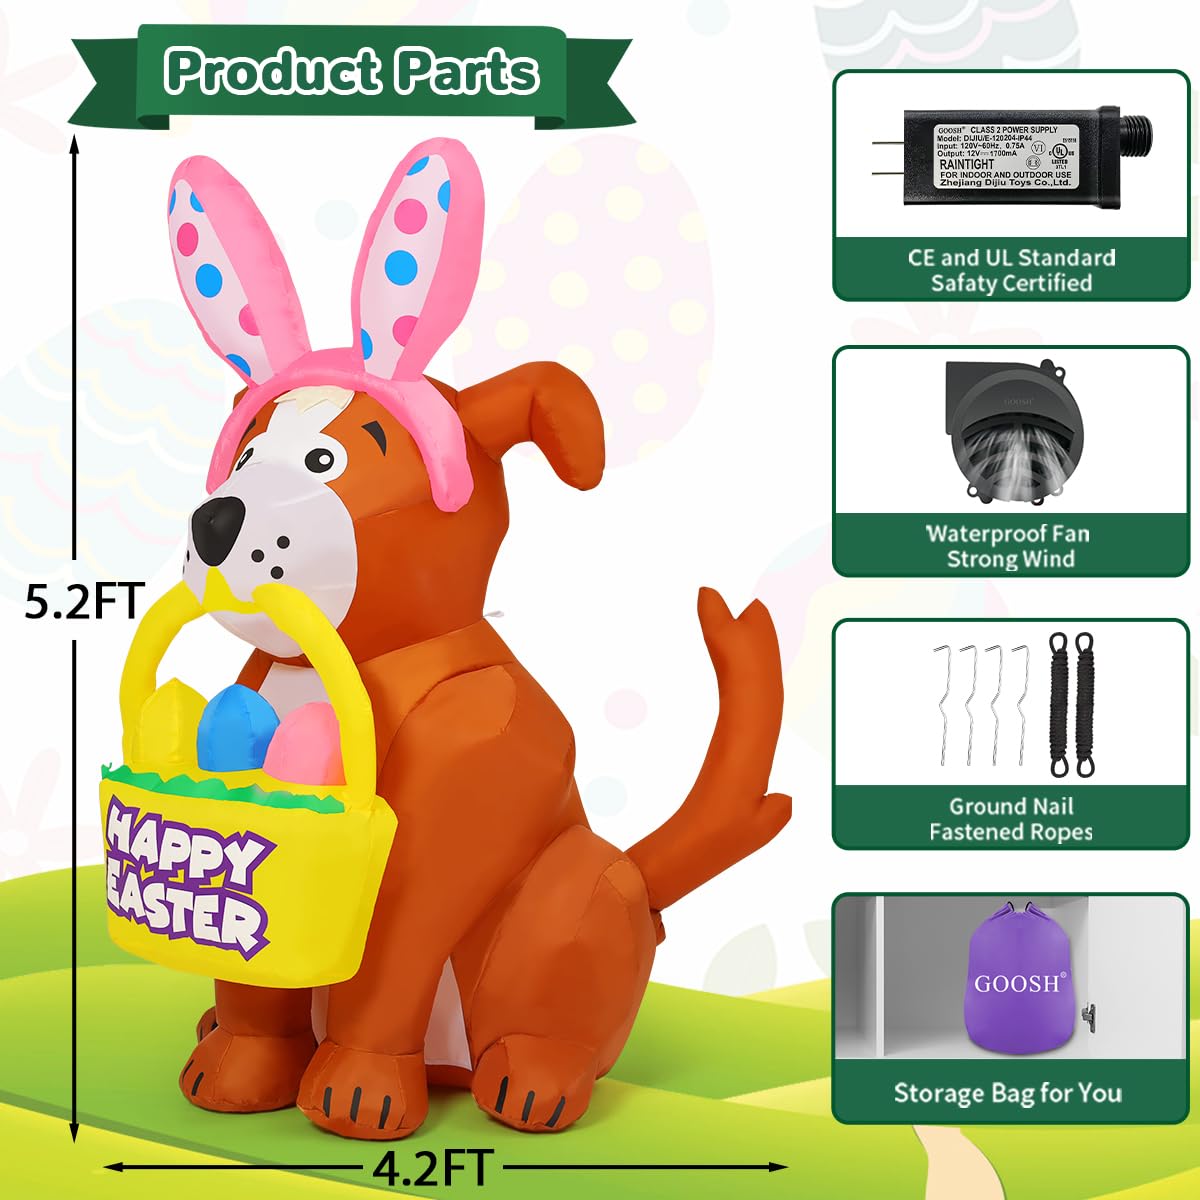 GOOSH 5 FT Easter Inflatables Outdoor Decorations, Easter Dog Blow Up Yard Decorations Easter Decor with LED Lights for Easter Party Yard Garden Lawn